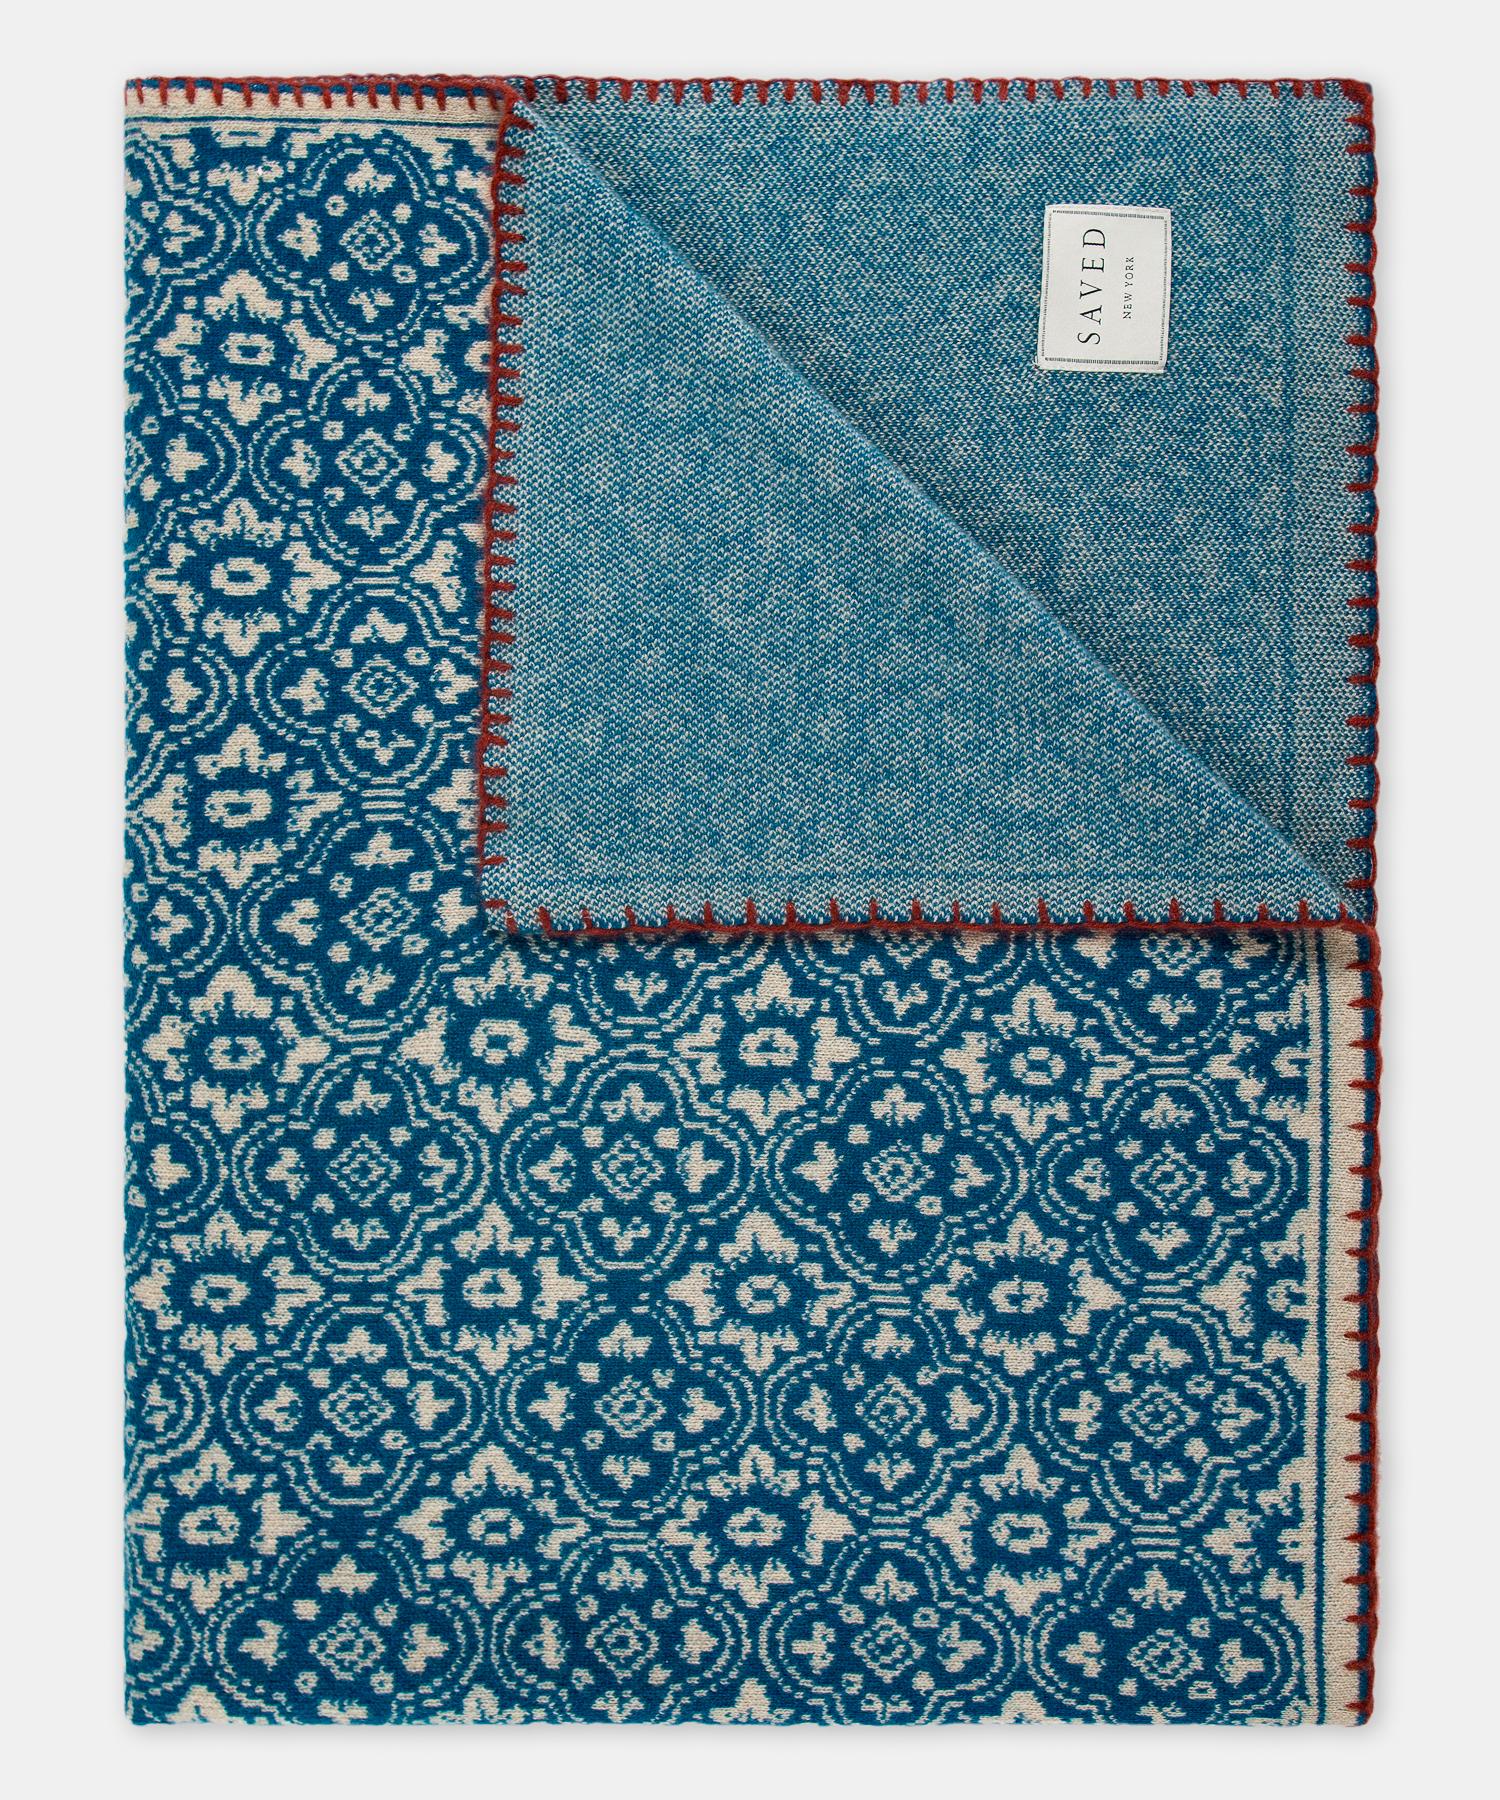 Renaissance N. 25 Bleu Throw by Saved, New York

Antoinette Poisson’s traditional handmade French papers translated into cashmere. Finished by hand with a contrasting rouge blanket stitch and text elements.